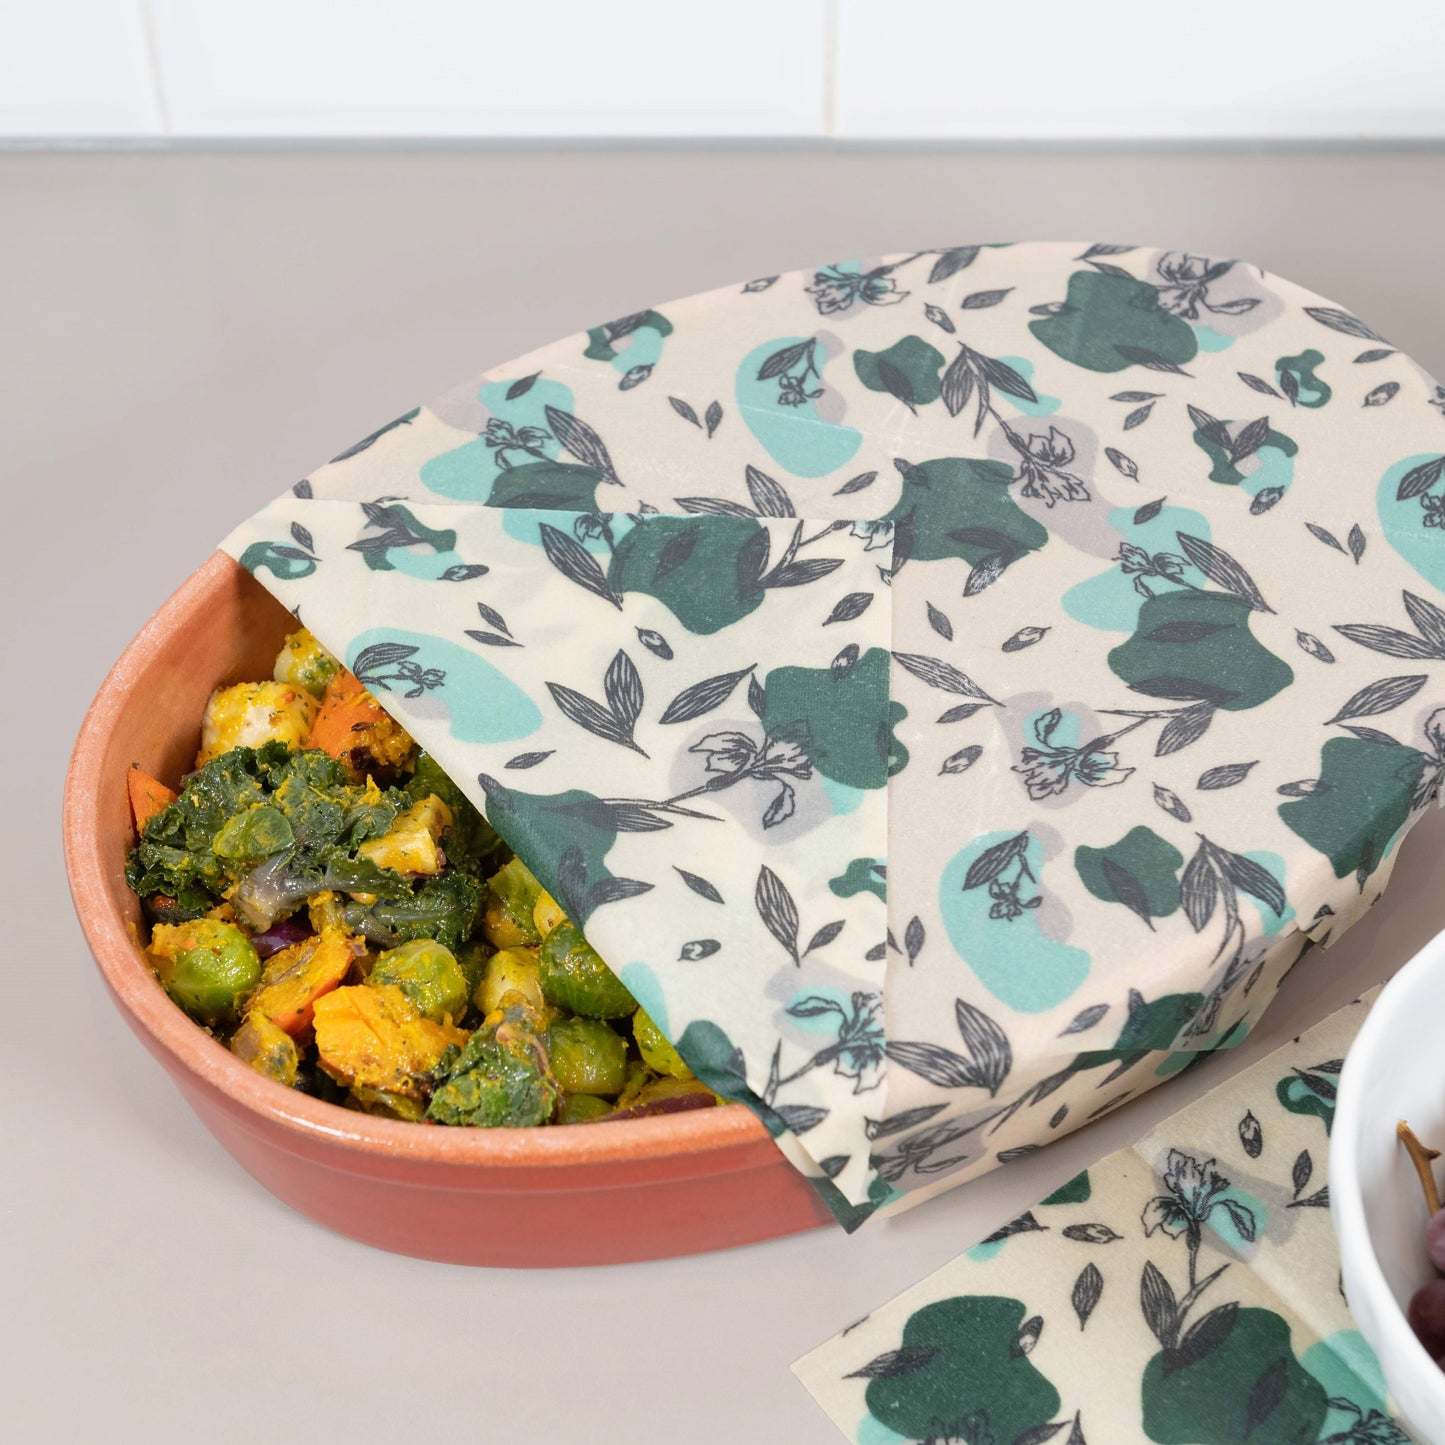 vegan food wraps made with organic cotton with warm food